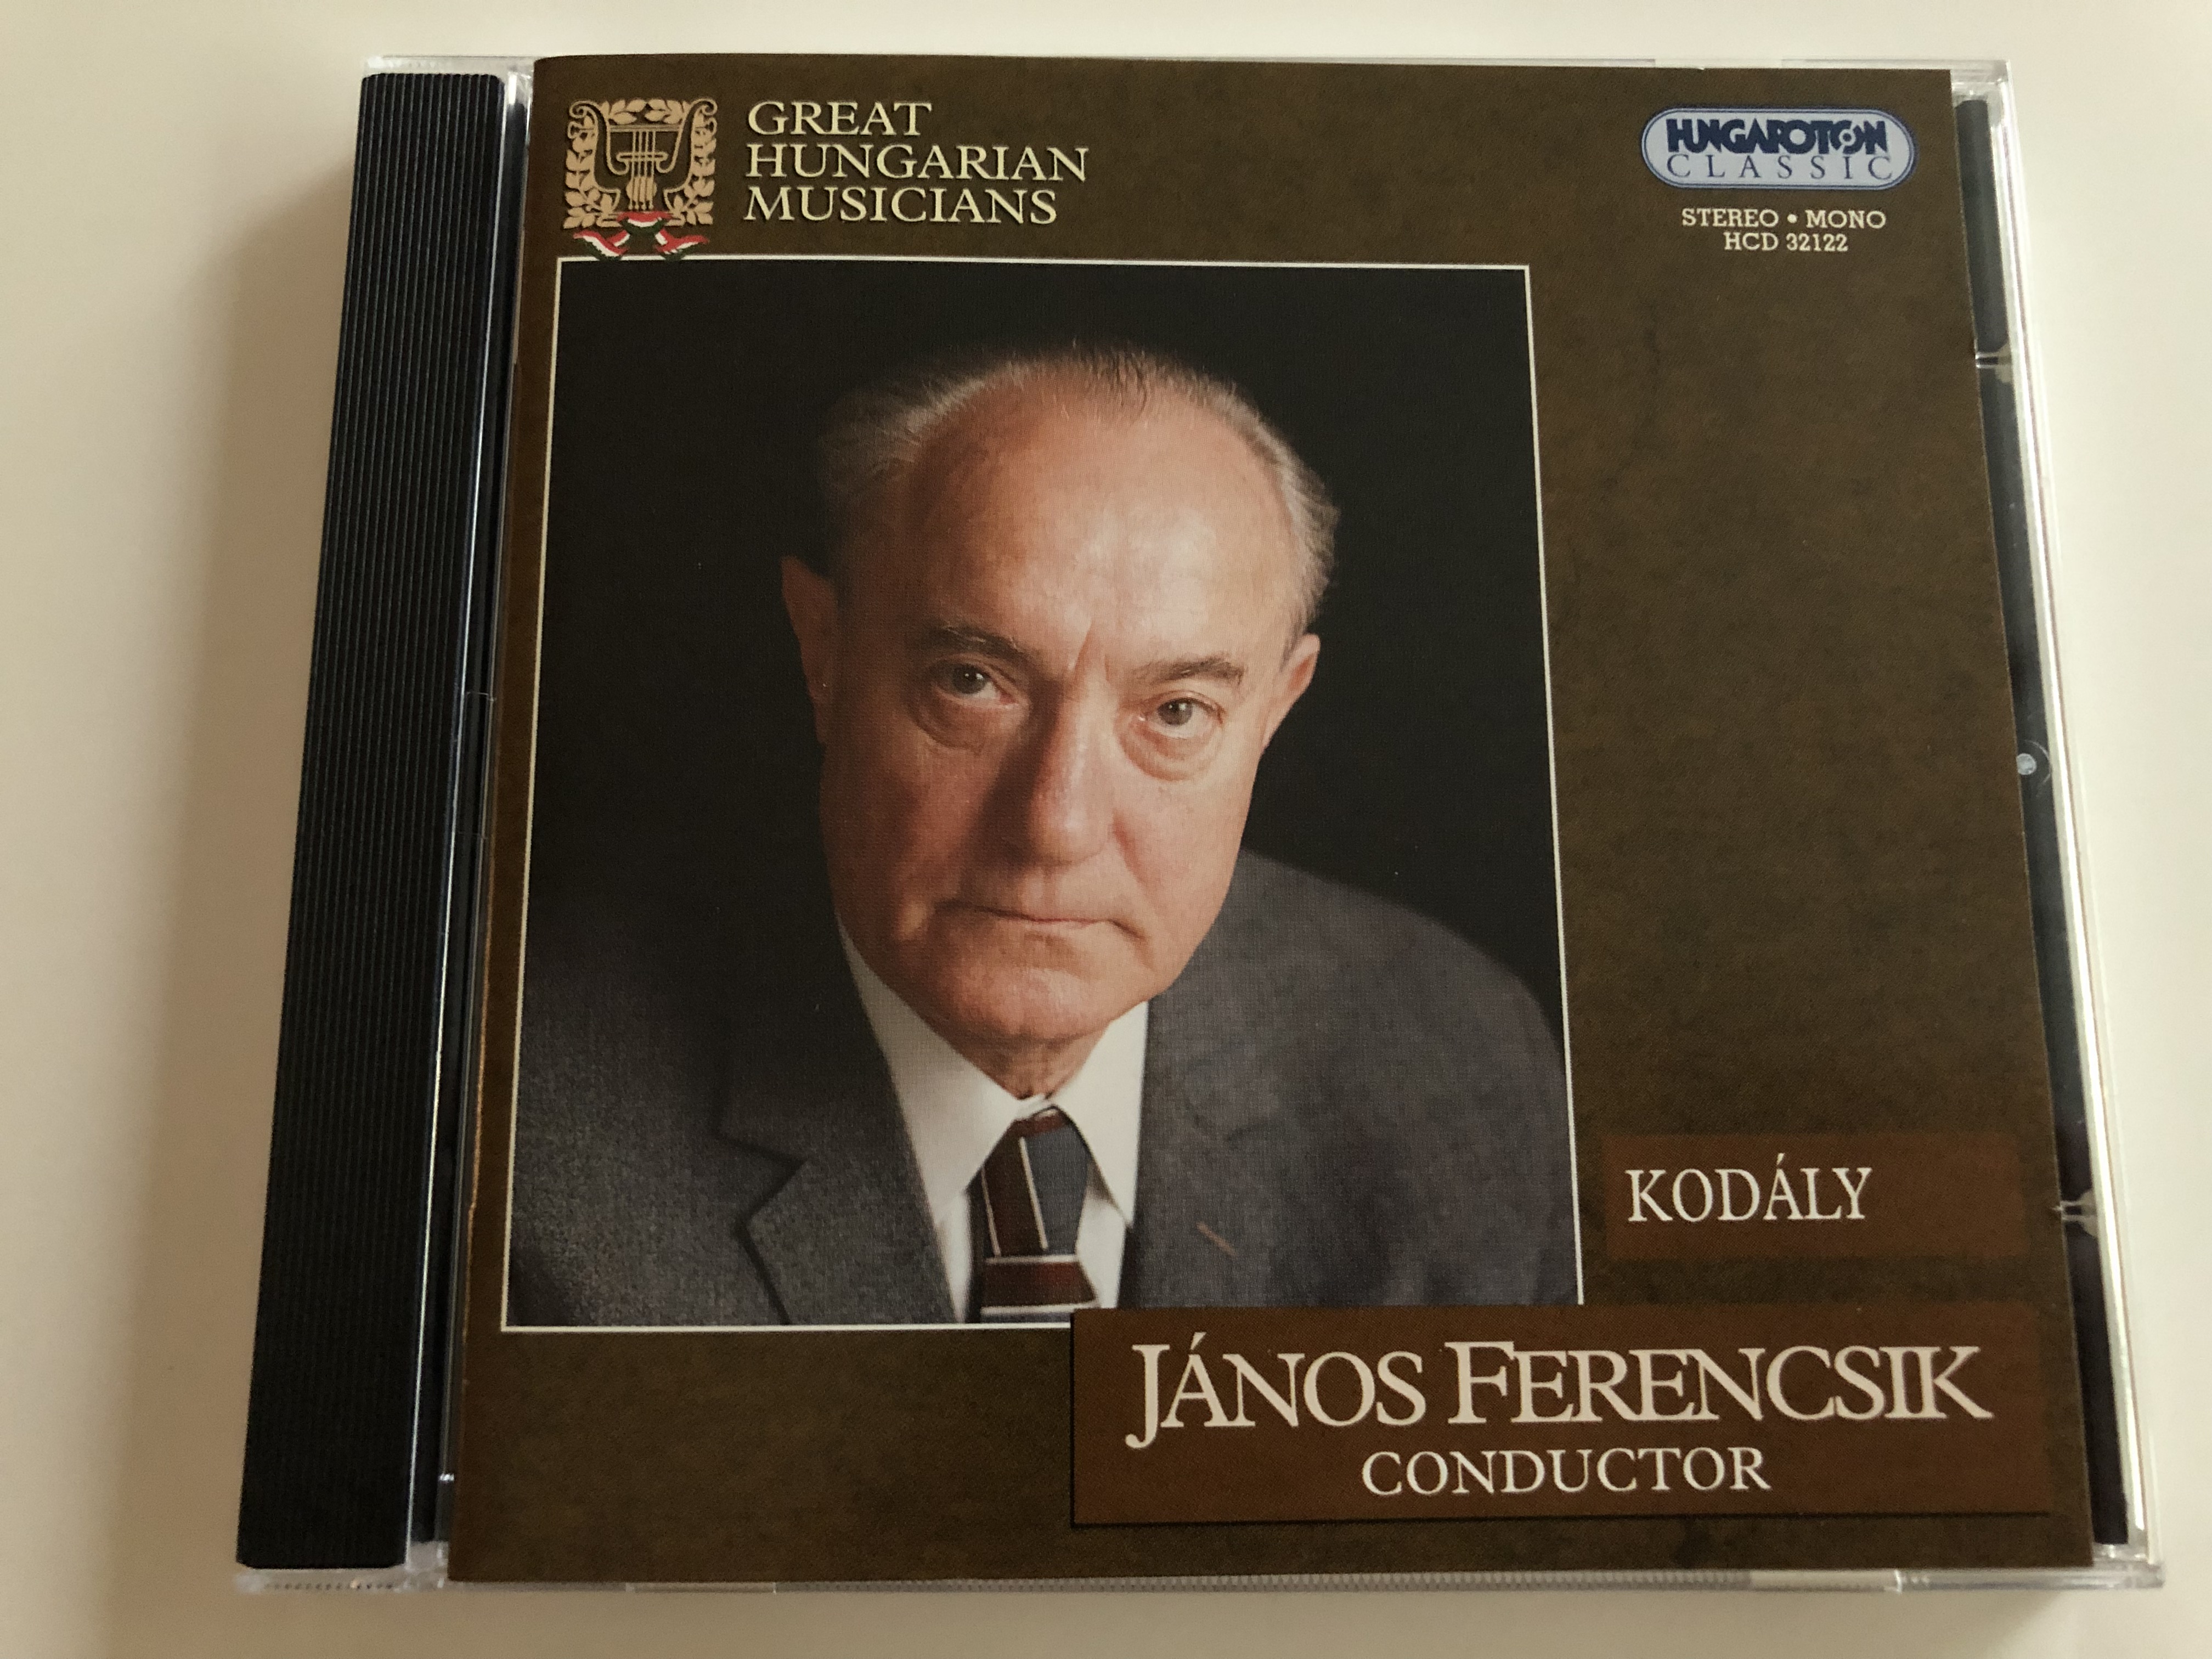 j-nos-ferencsik-conductor-great-hungarian-musicians-kod-ly-budapest-philharmonic-orchestra-historical-recordings-hungaroton-classic-audio-cd-2002-hcd-32122-1-.jpg